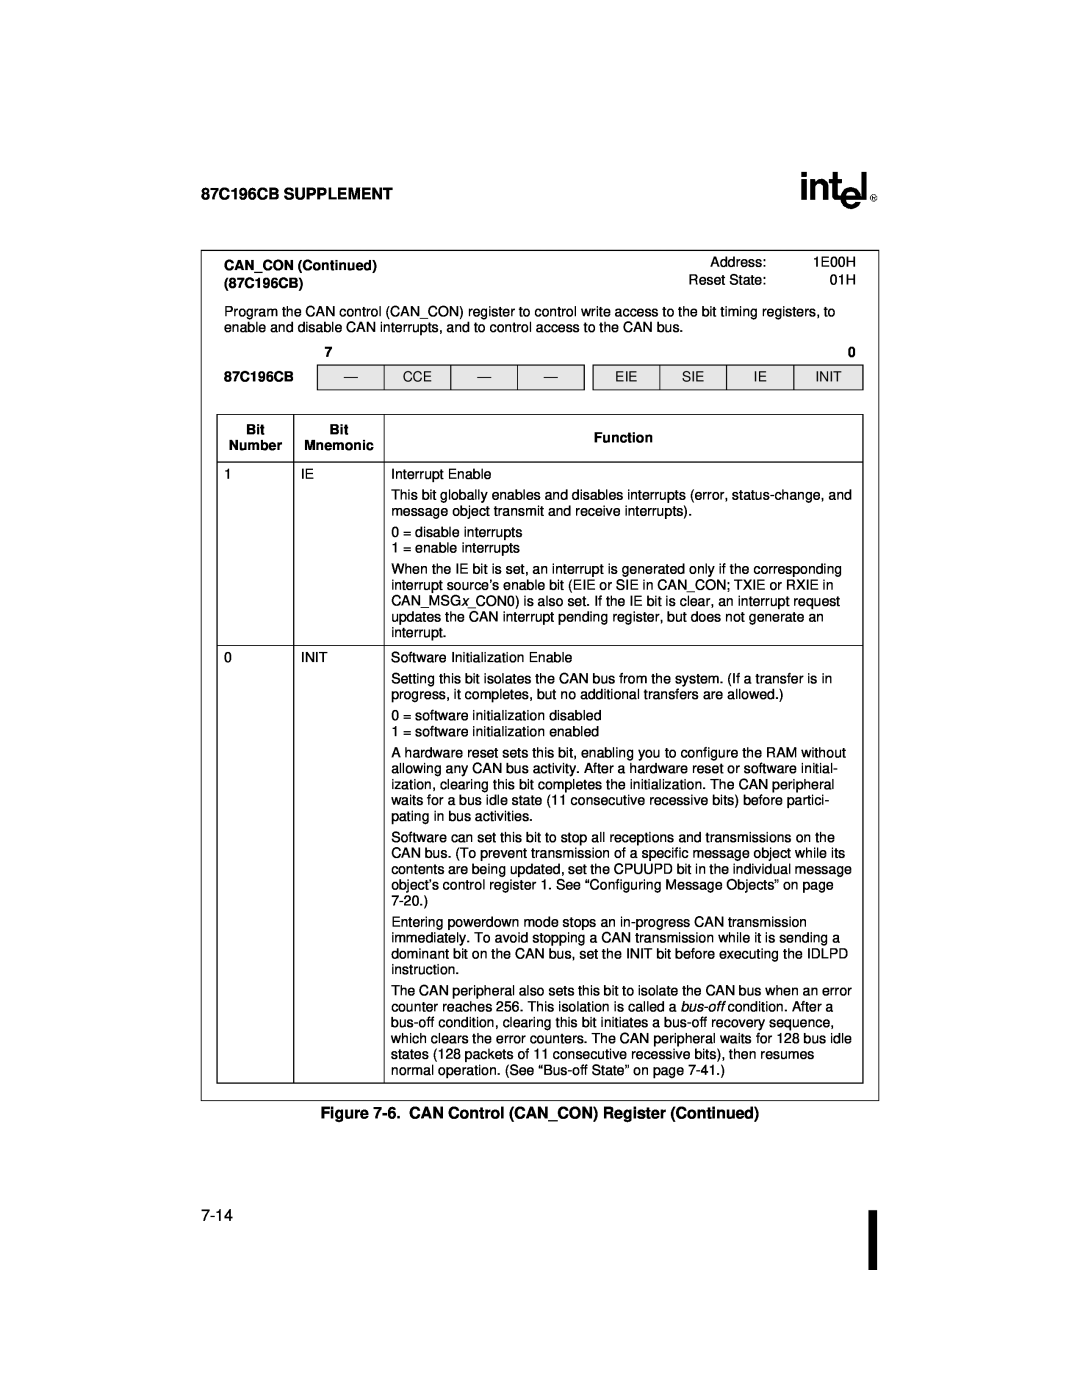 Intel 8XC196NT user manual 87C196CB SUPPLEMENT, 6. CAN Control CANCON Register Continued 